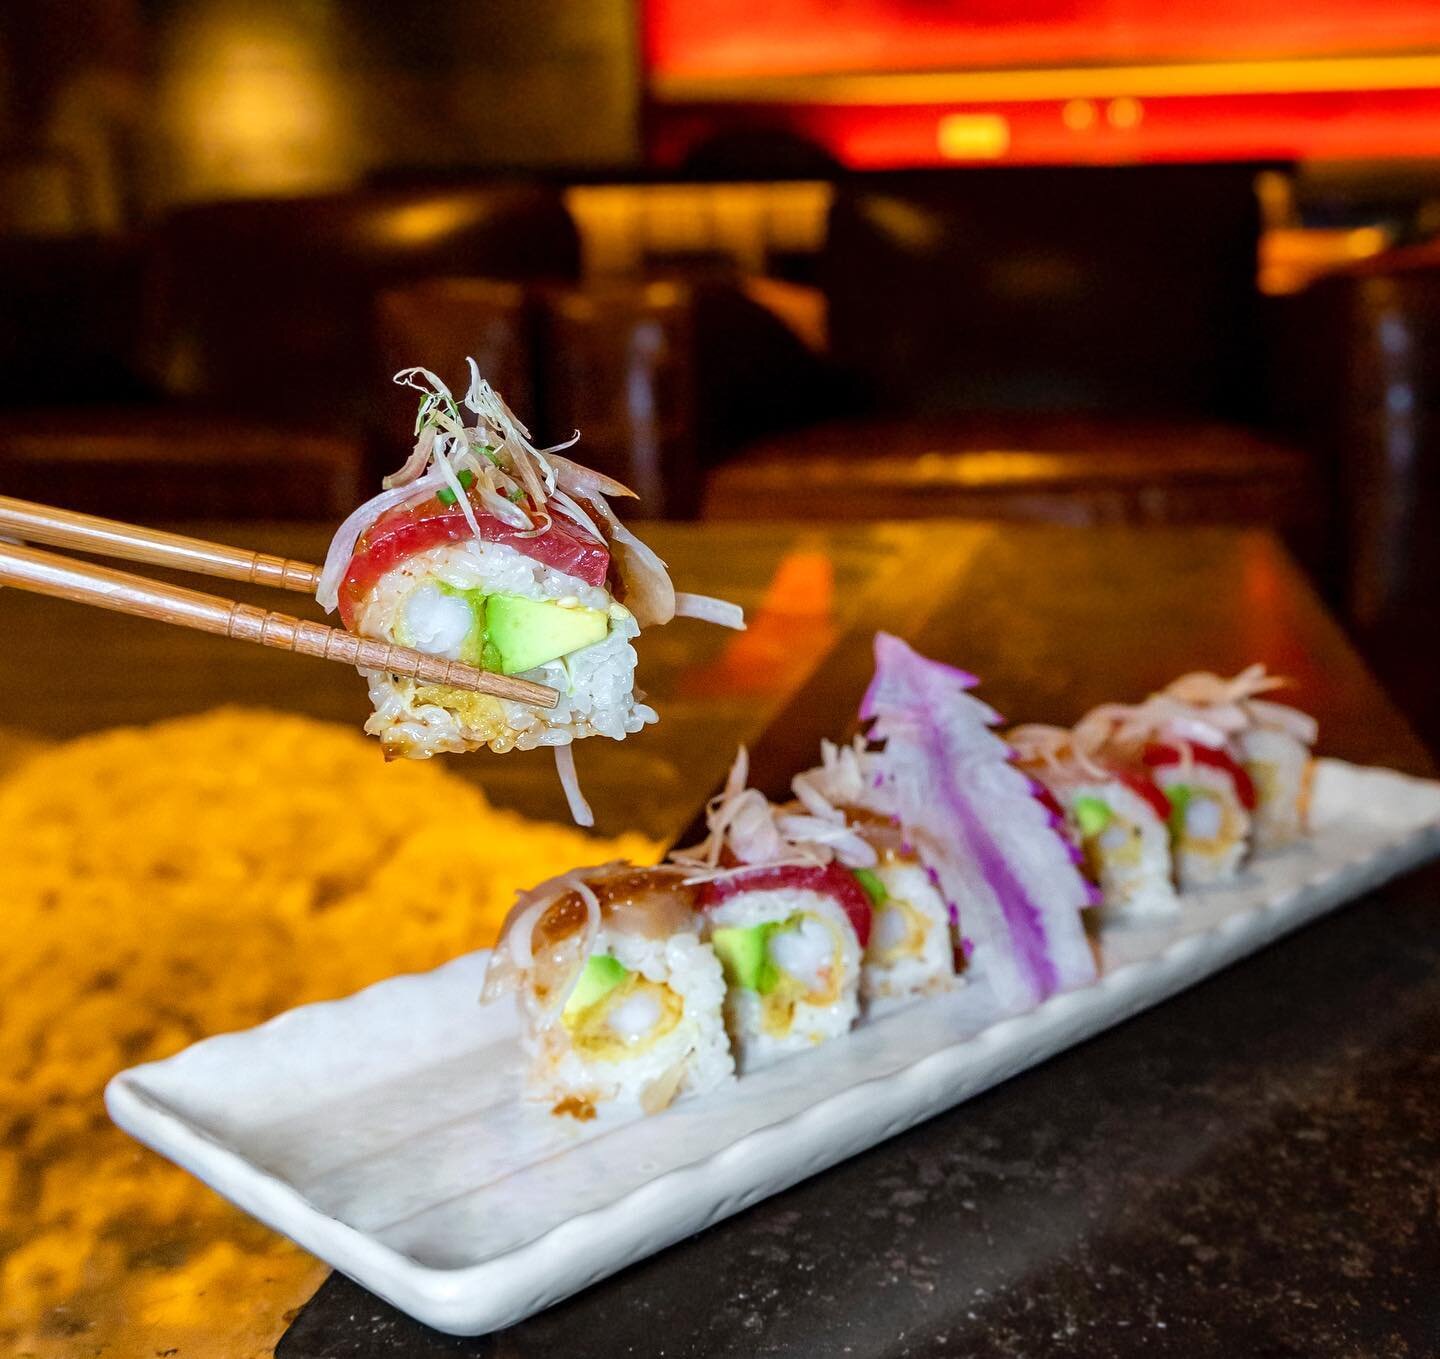 We&rsquo;re in heaven when our Albacore Tuna Roll is a special of the night!
&bull;⁠
&bull;⁠
&bull;⁠
#MrsFishLA #SushiArtWhisky #DTLA #LosAngeles #DiscoverLA #DineLA #LAEats #LA #LAFoodie #LAFood #DowntownLosAngeles #JapaneseRestaurant #Sushi #HappyH